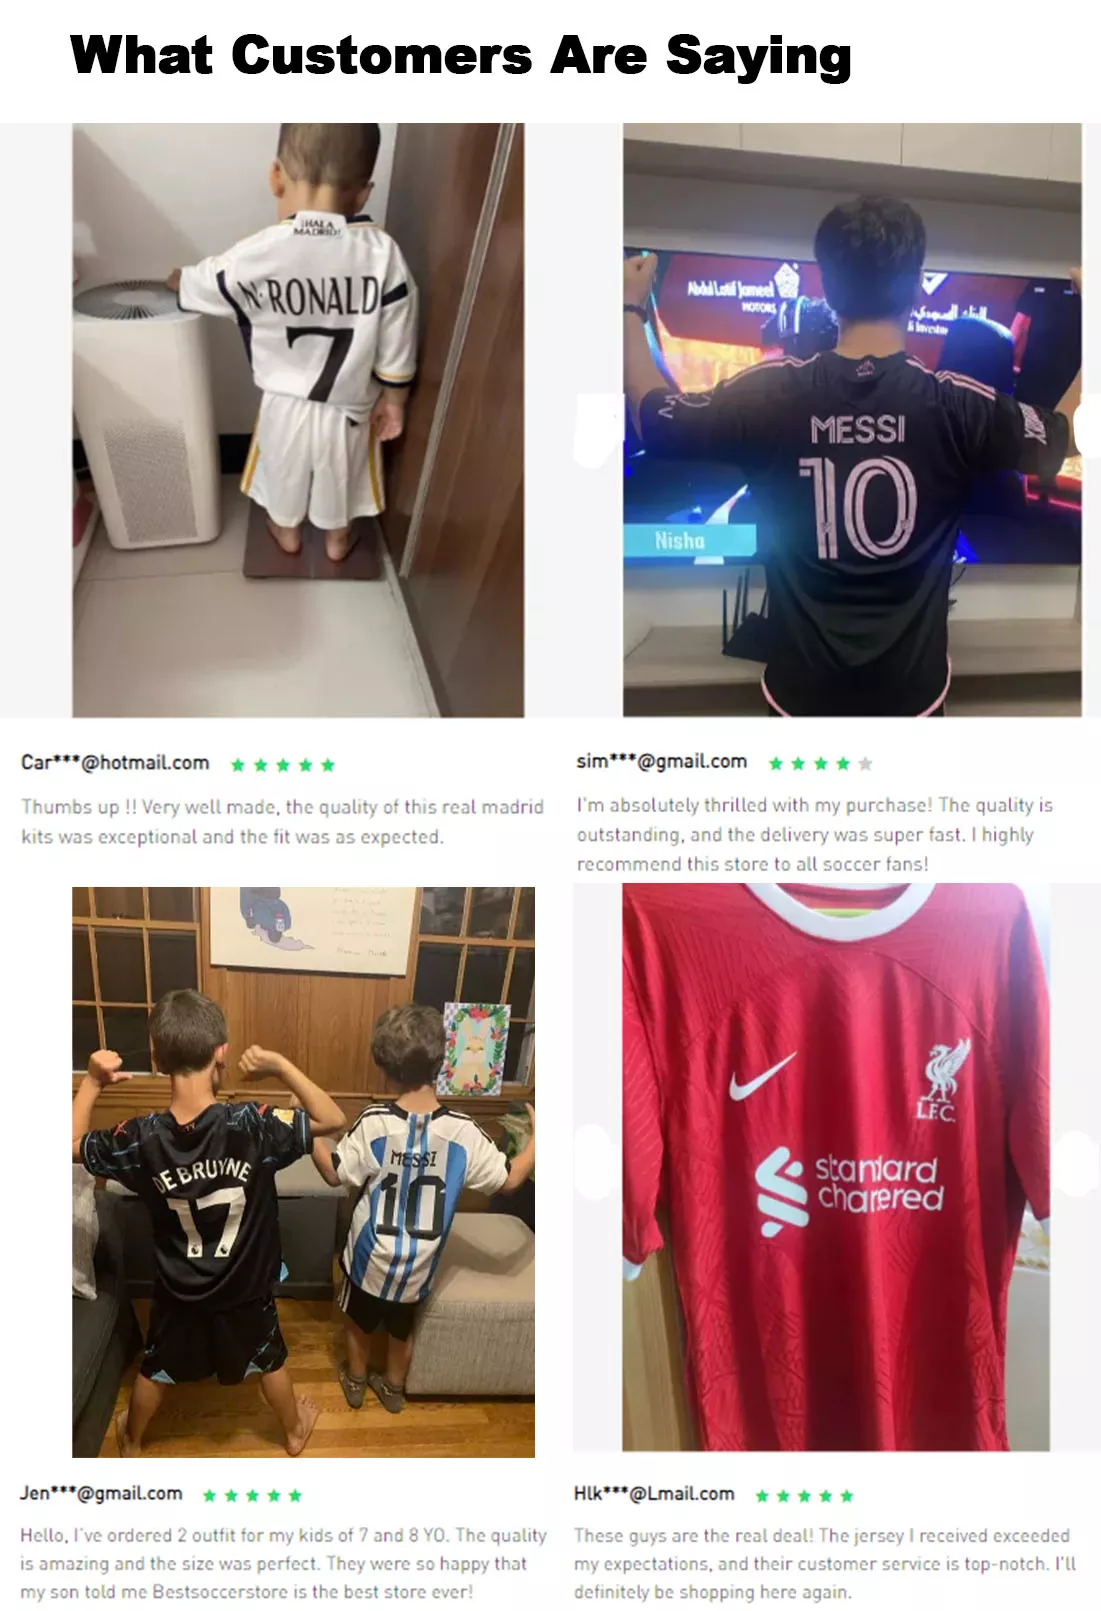 What Customers Are Saying - bestsoccerstore